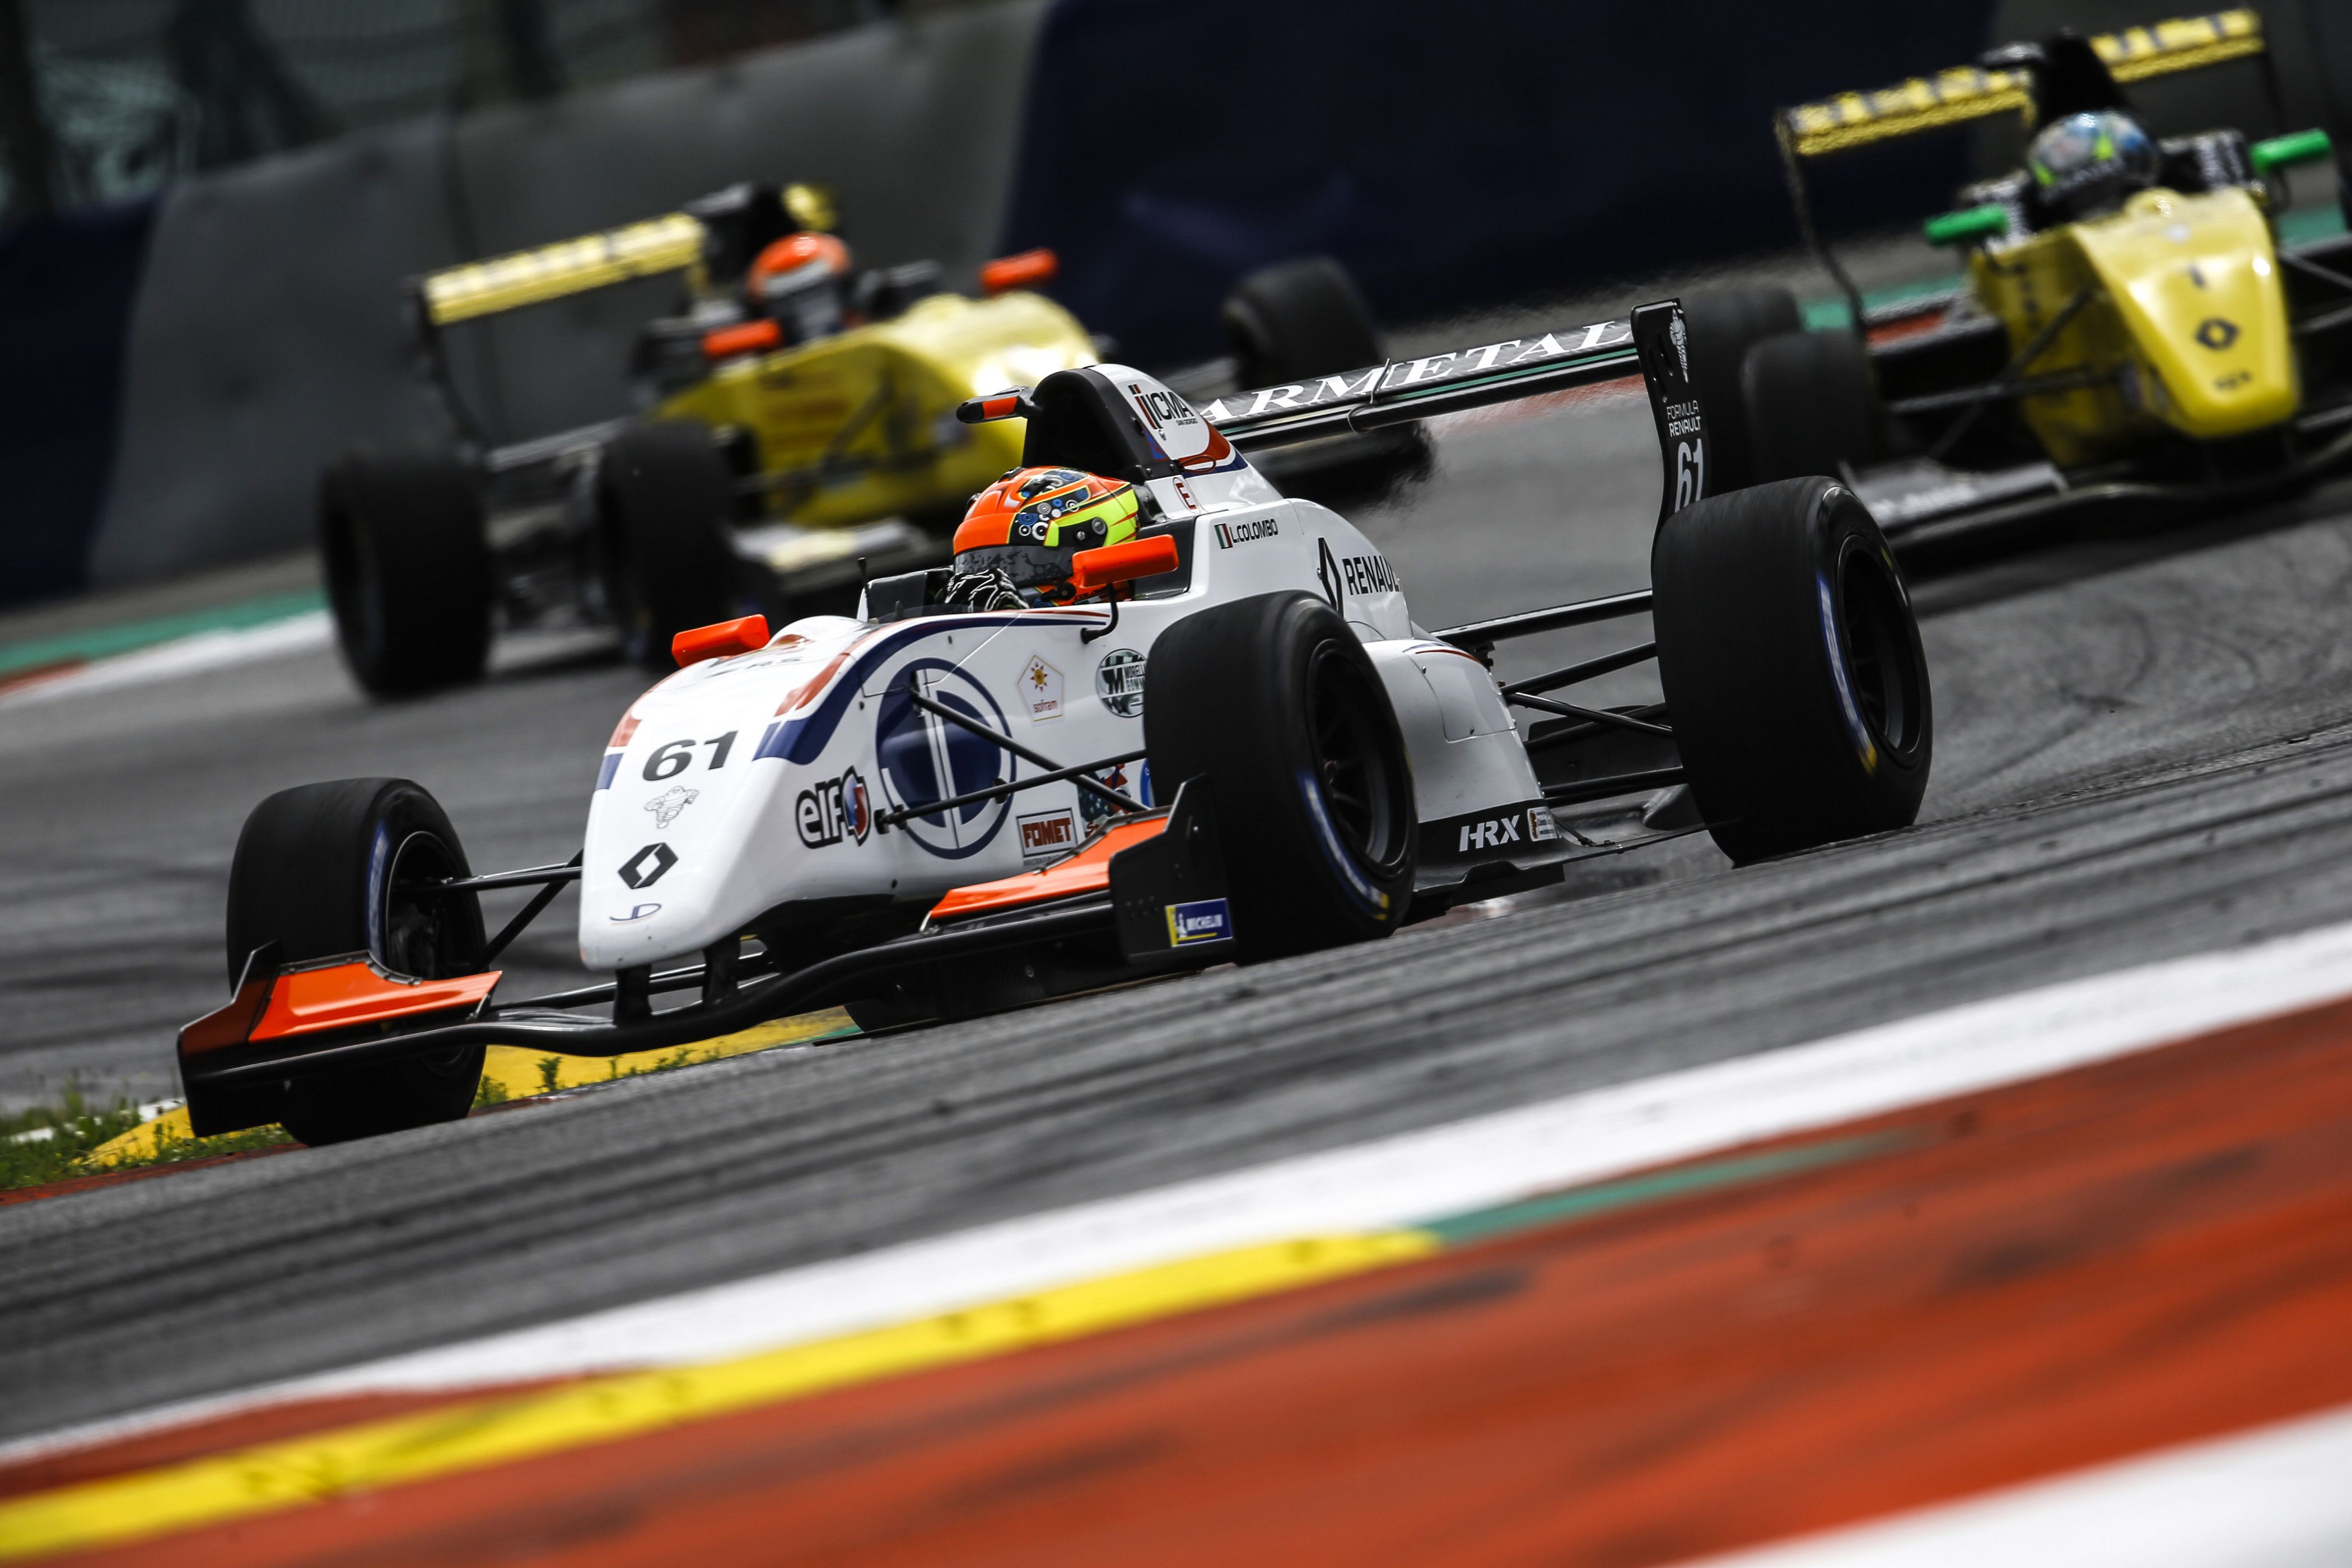 61 COLOMBO Lorenzo (ita), FR 2.0 Eurocup Renault team JD motorsports, action during the 2018 Formula Renault 2.0 race of Red Bull Ring, Spielberg, Austria, from July 20 to 22 - Photo Jean Michel Le Meur / DPPI